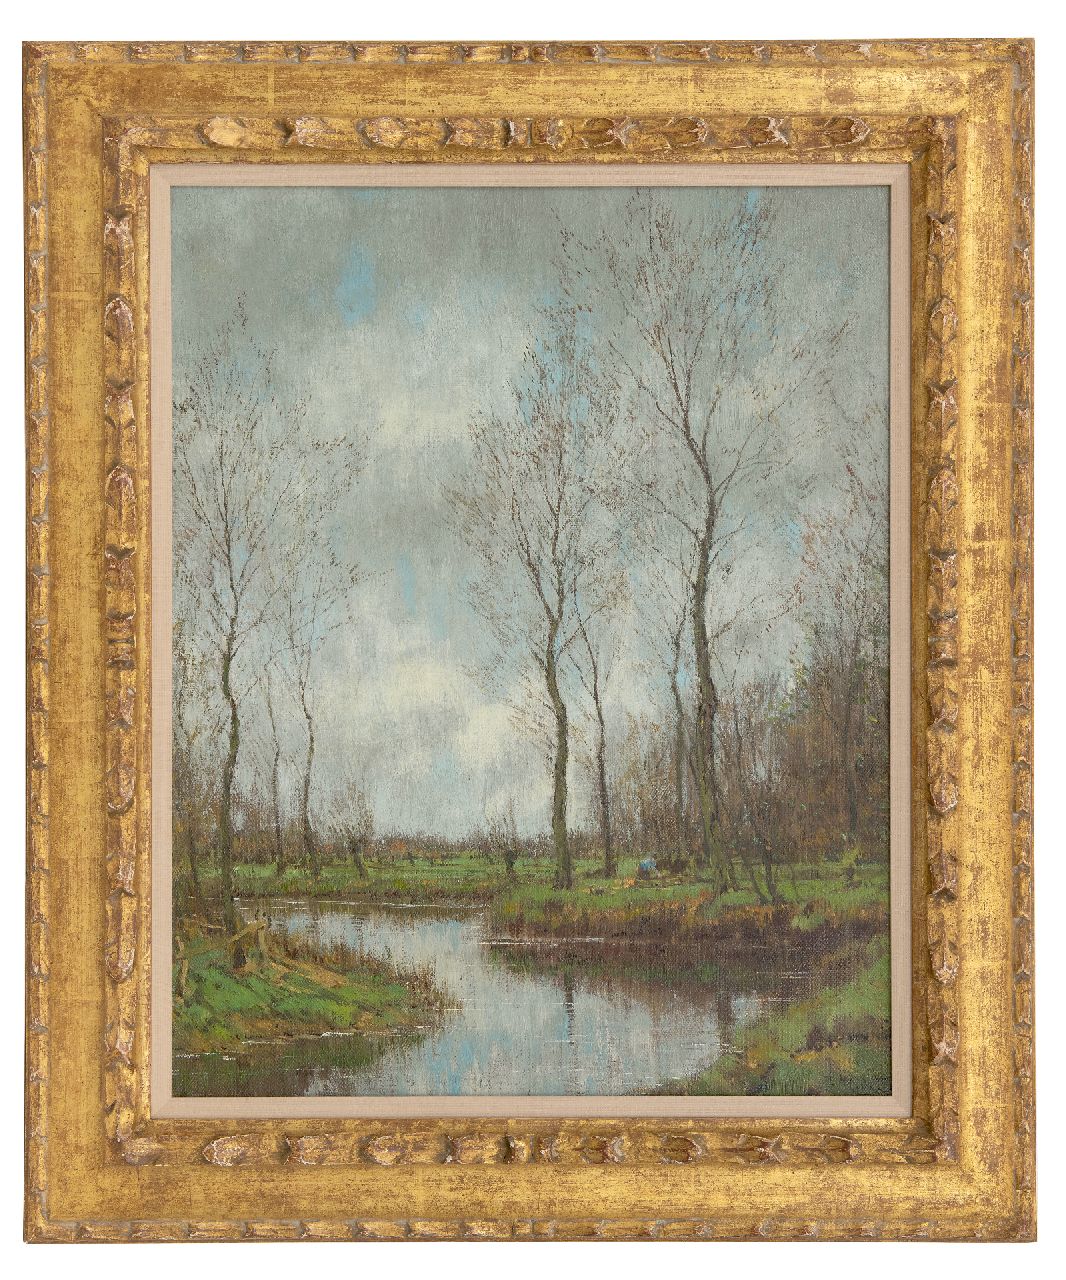 Gorter A.M.  | 'Arnold' Marc Gorter | Paintings offered for sale | Woodworker near the Vordense Beek, oil on canvas 50.5 x 40.4 cm, signed l.r.